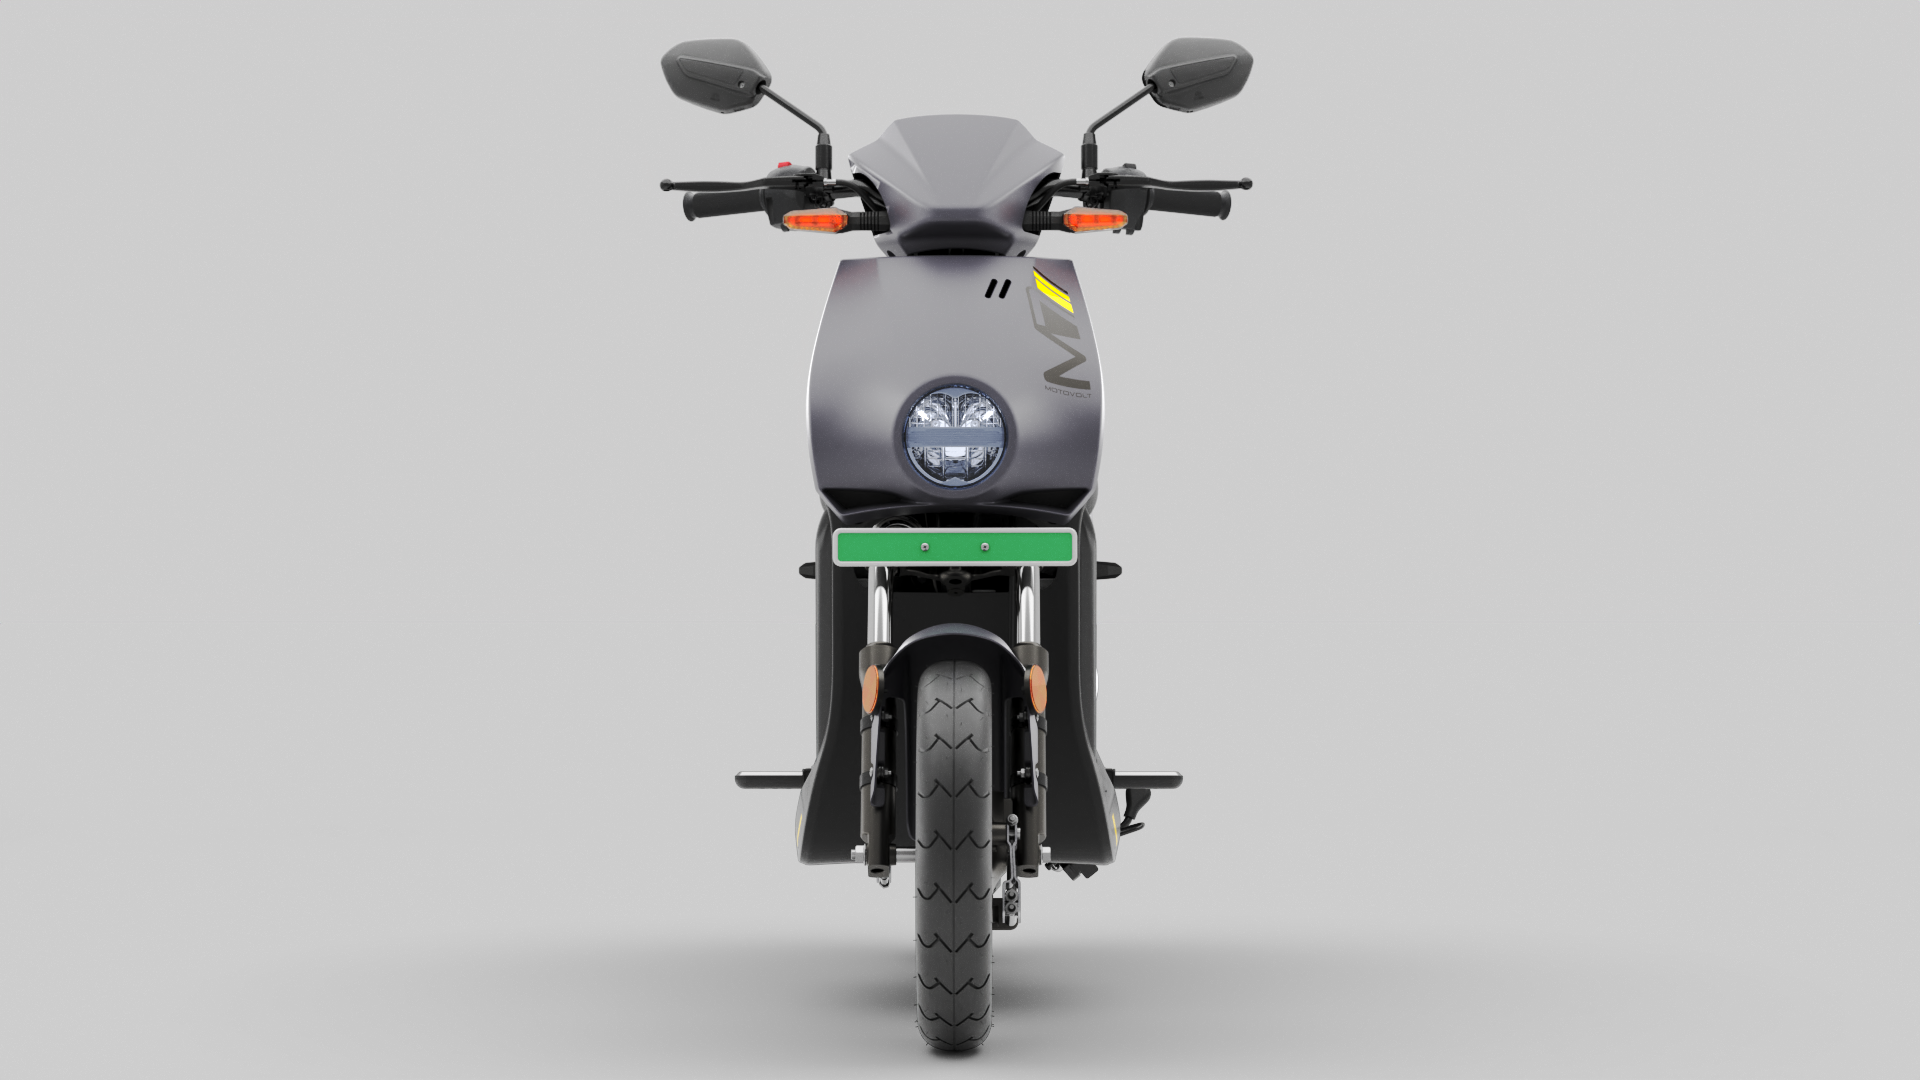 M7 Electric Scooter